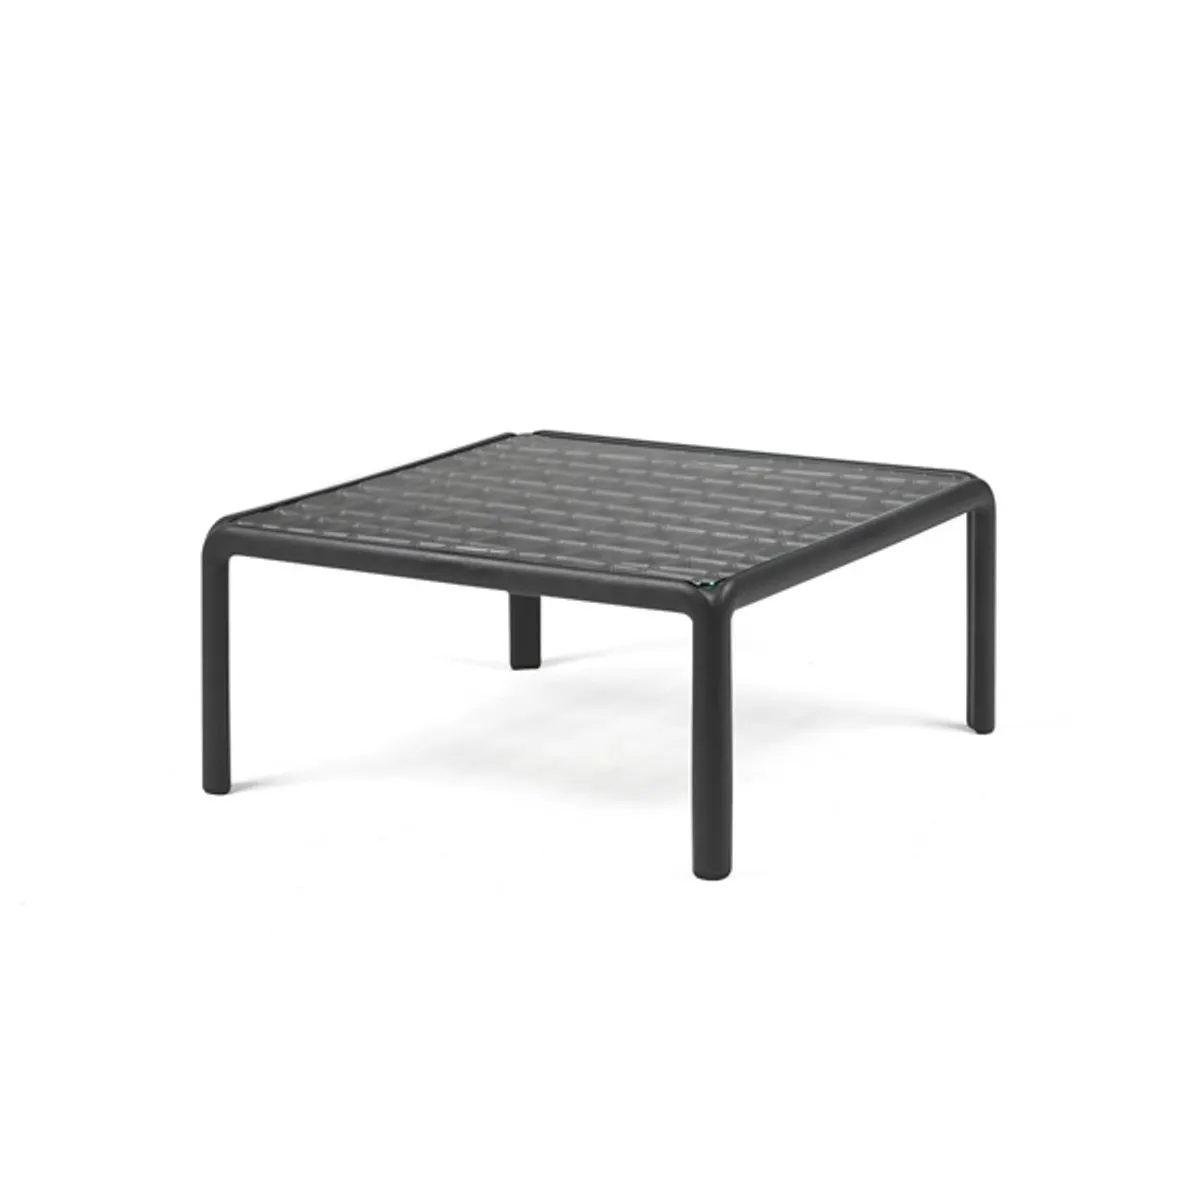 Komodo glass coffee table Inside Out Contracts2